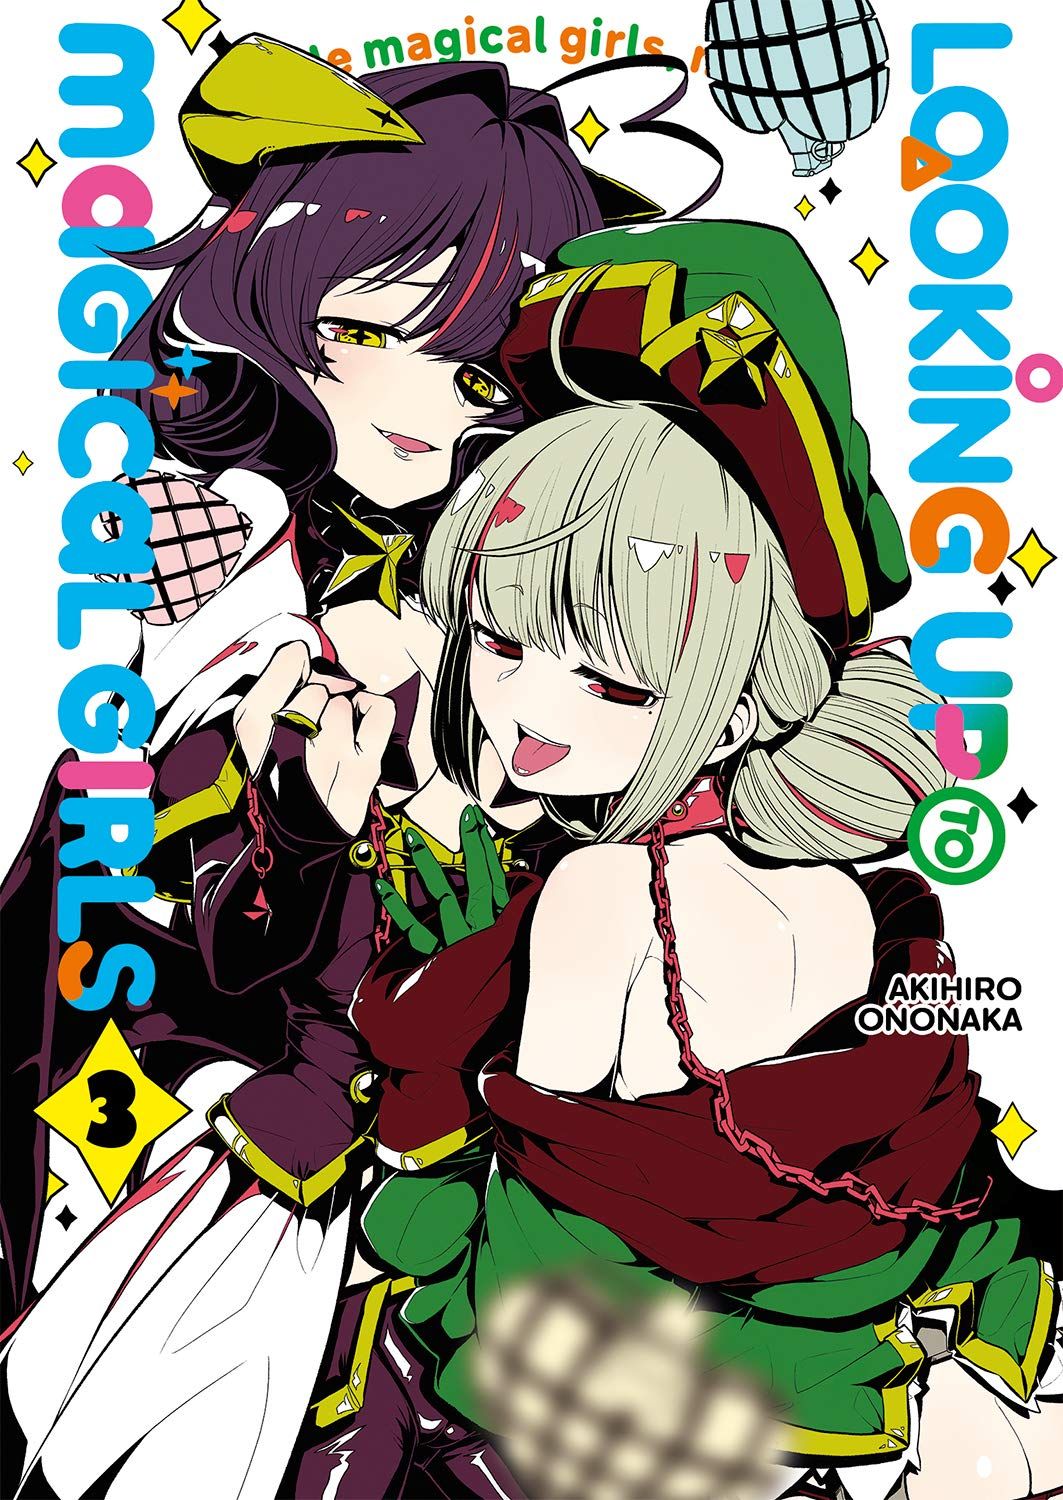 Looking up to Magical Girls Vol.3